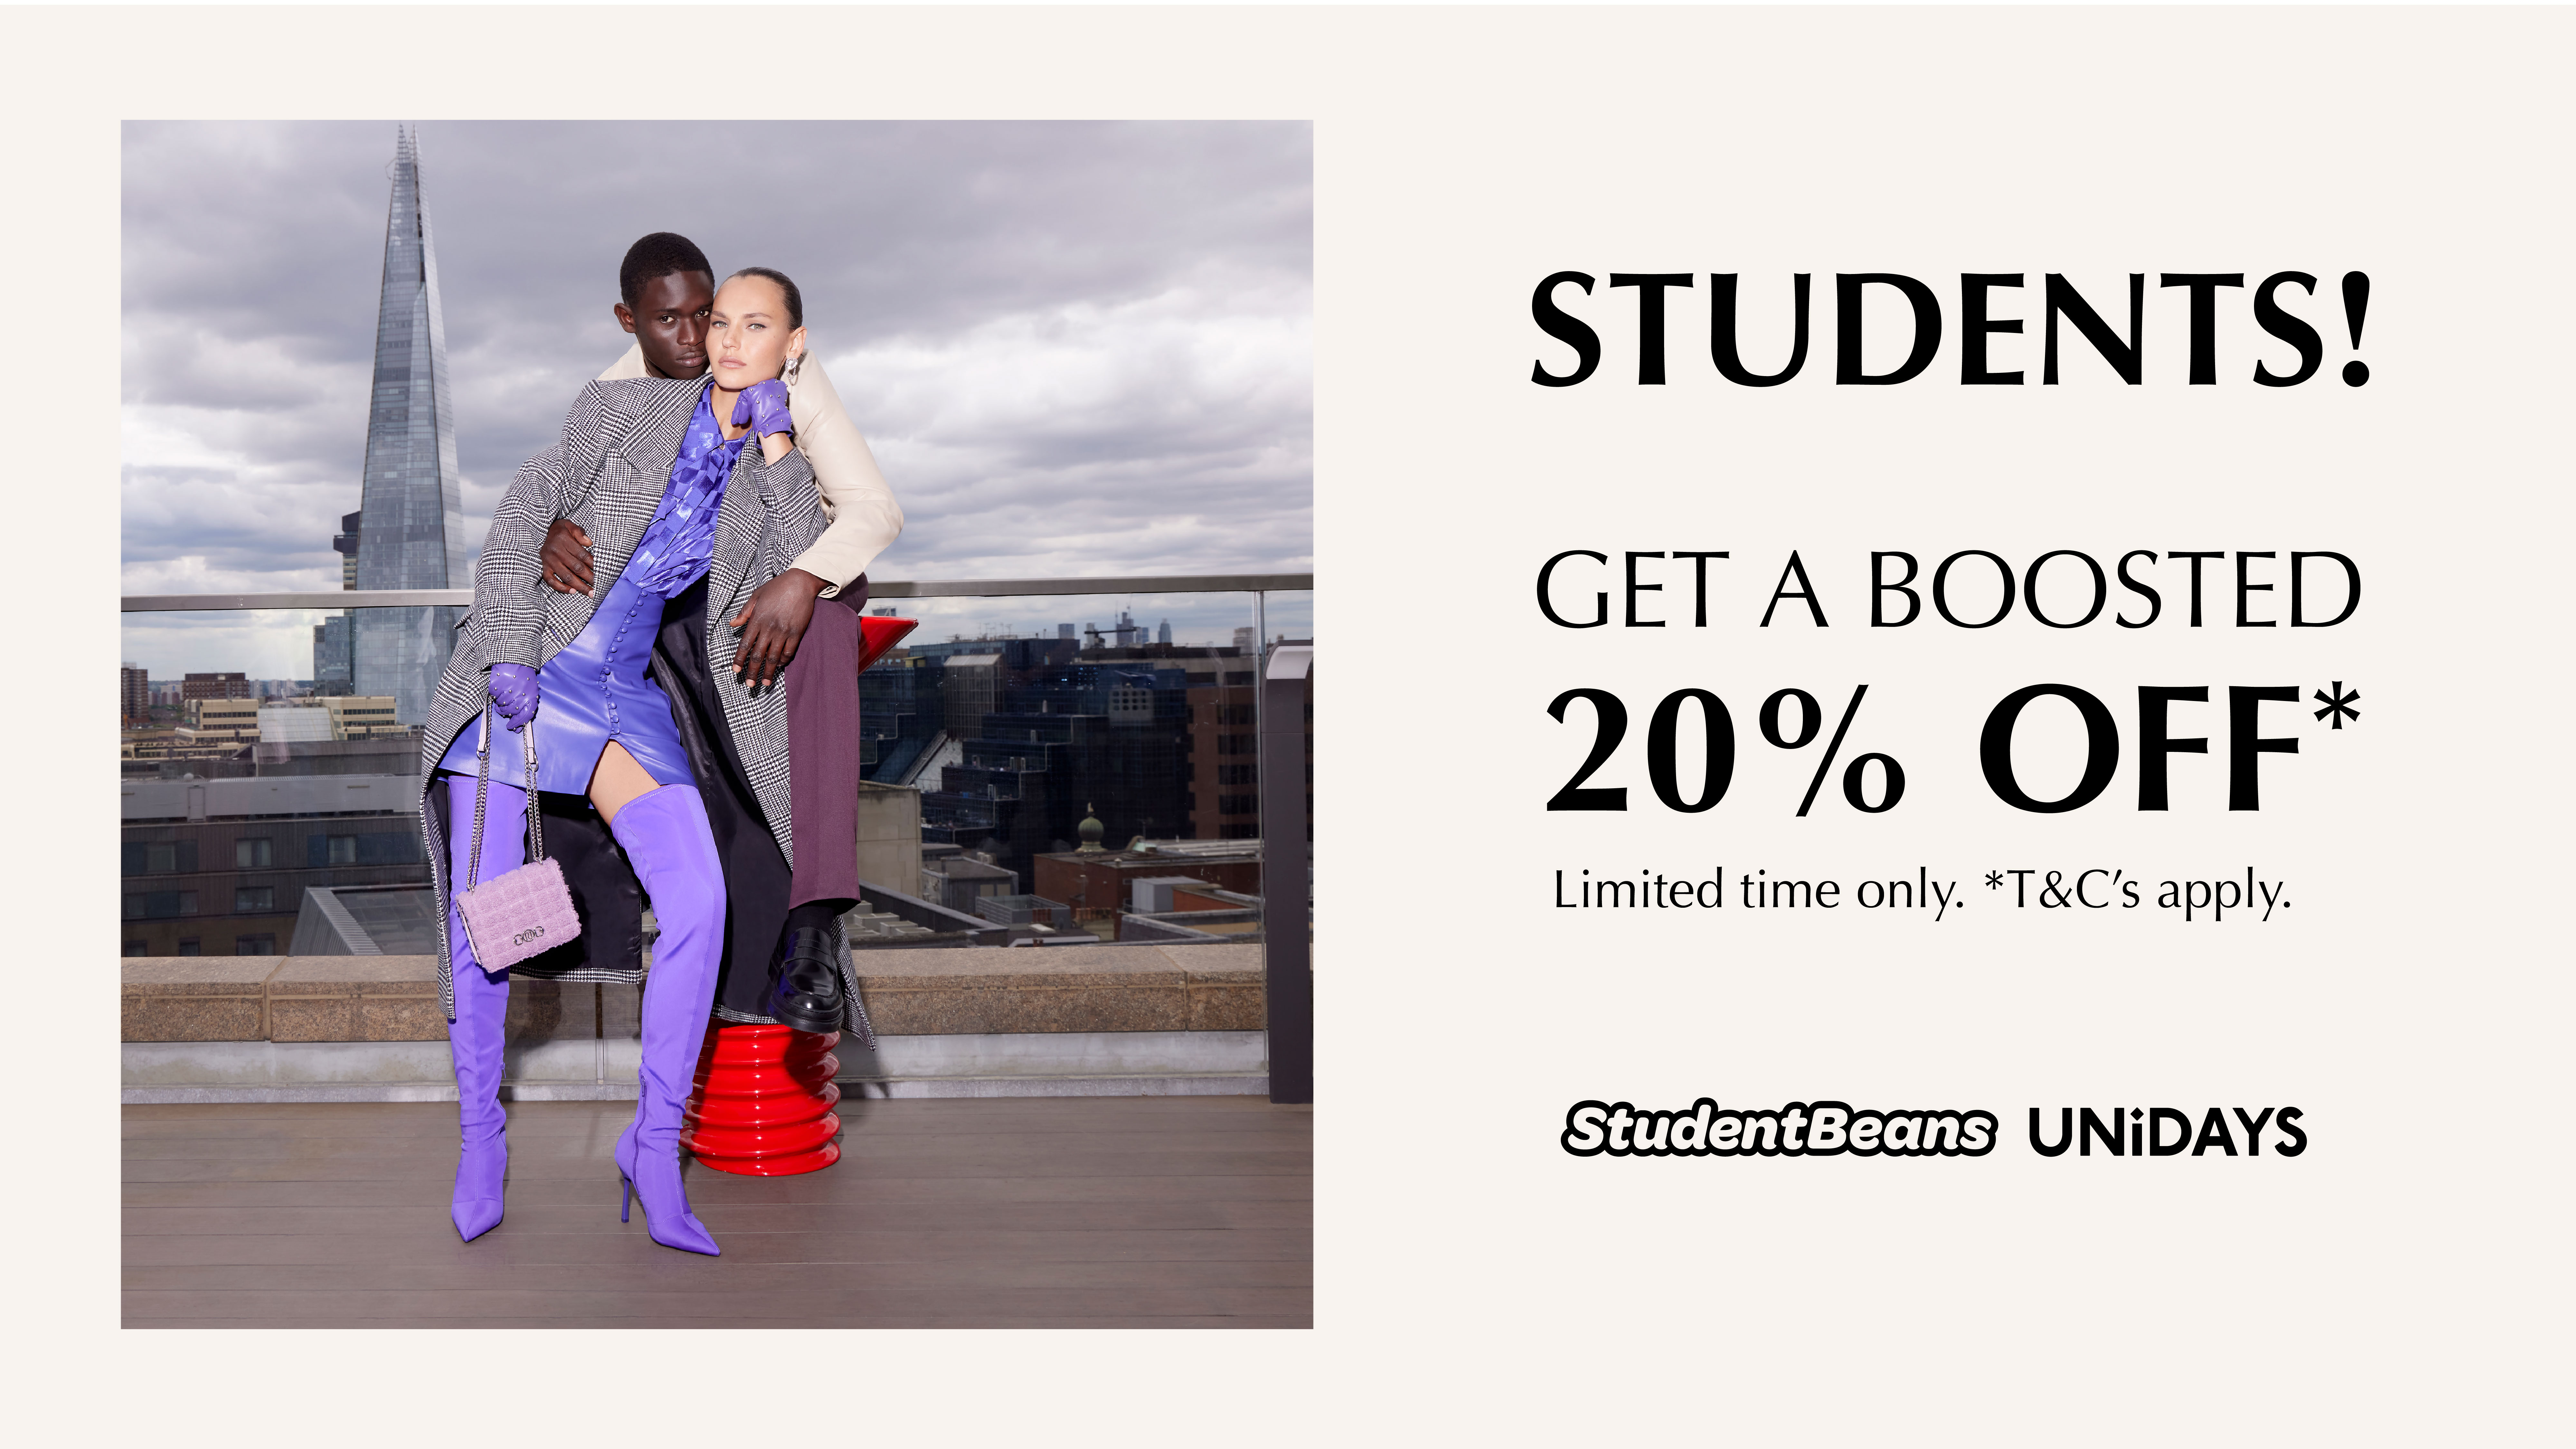 Students! Get a boosted 20% OFF at River Island